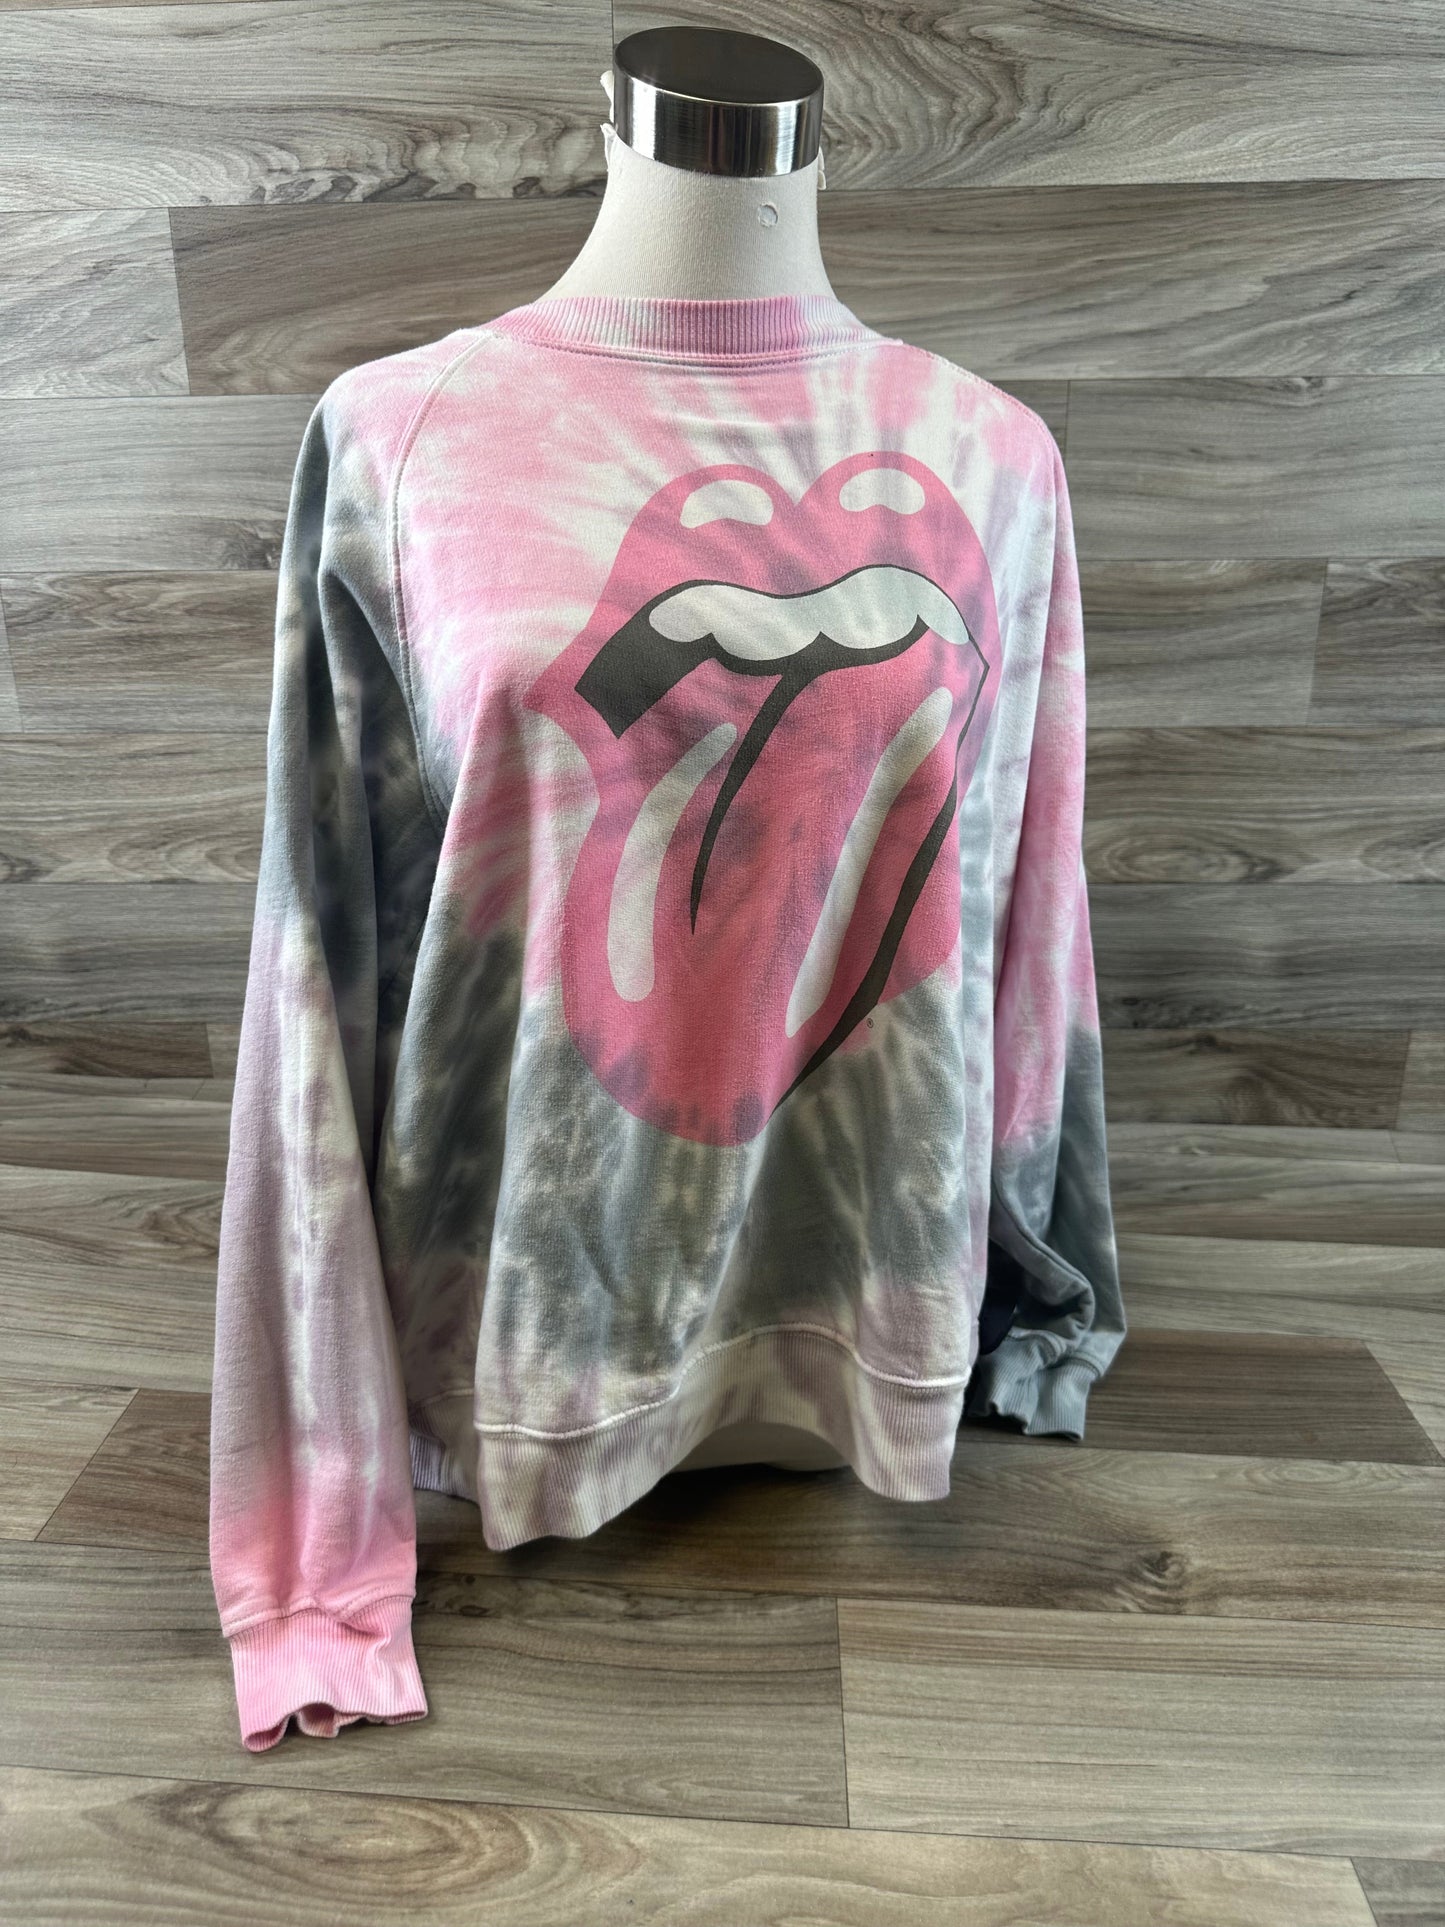 Tie Dye Print Top Long Sleeve Clothes Mentor, Size M